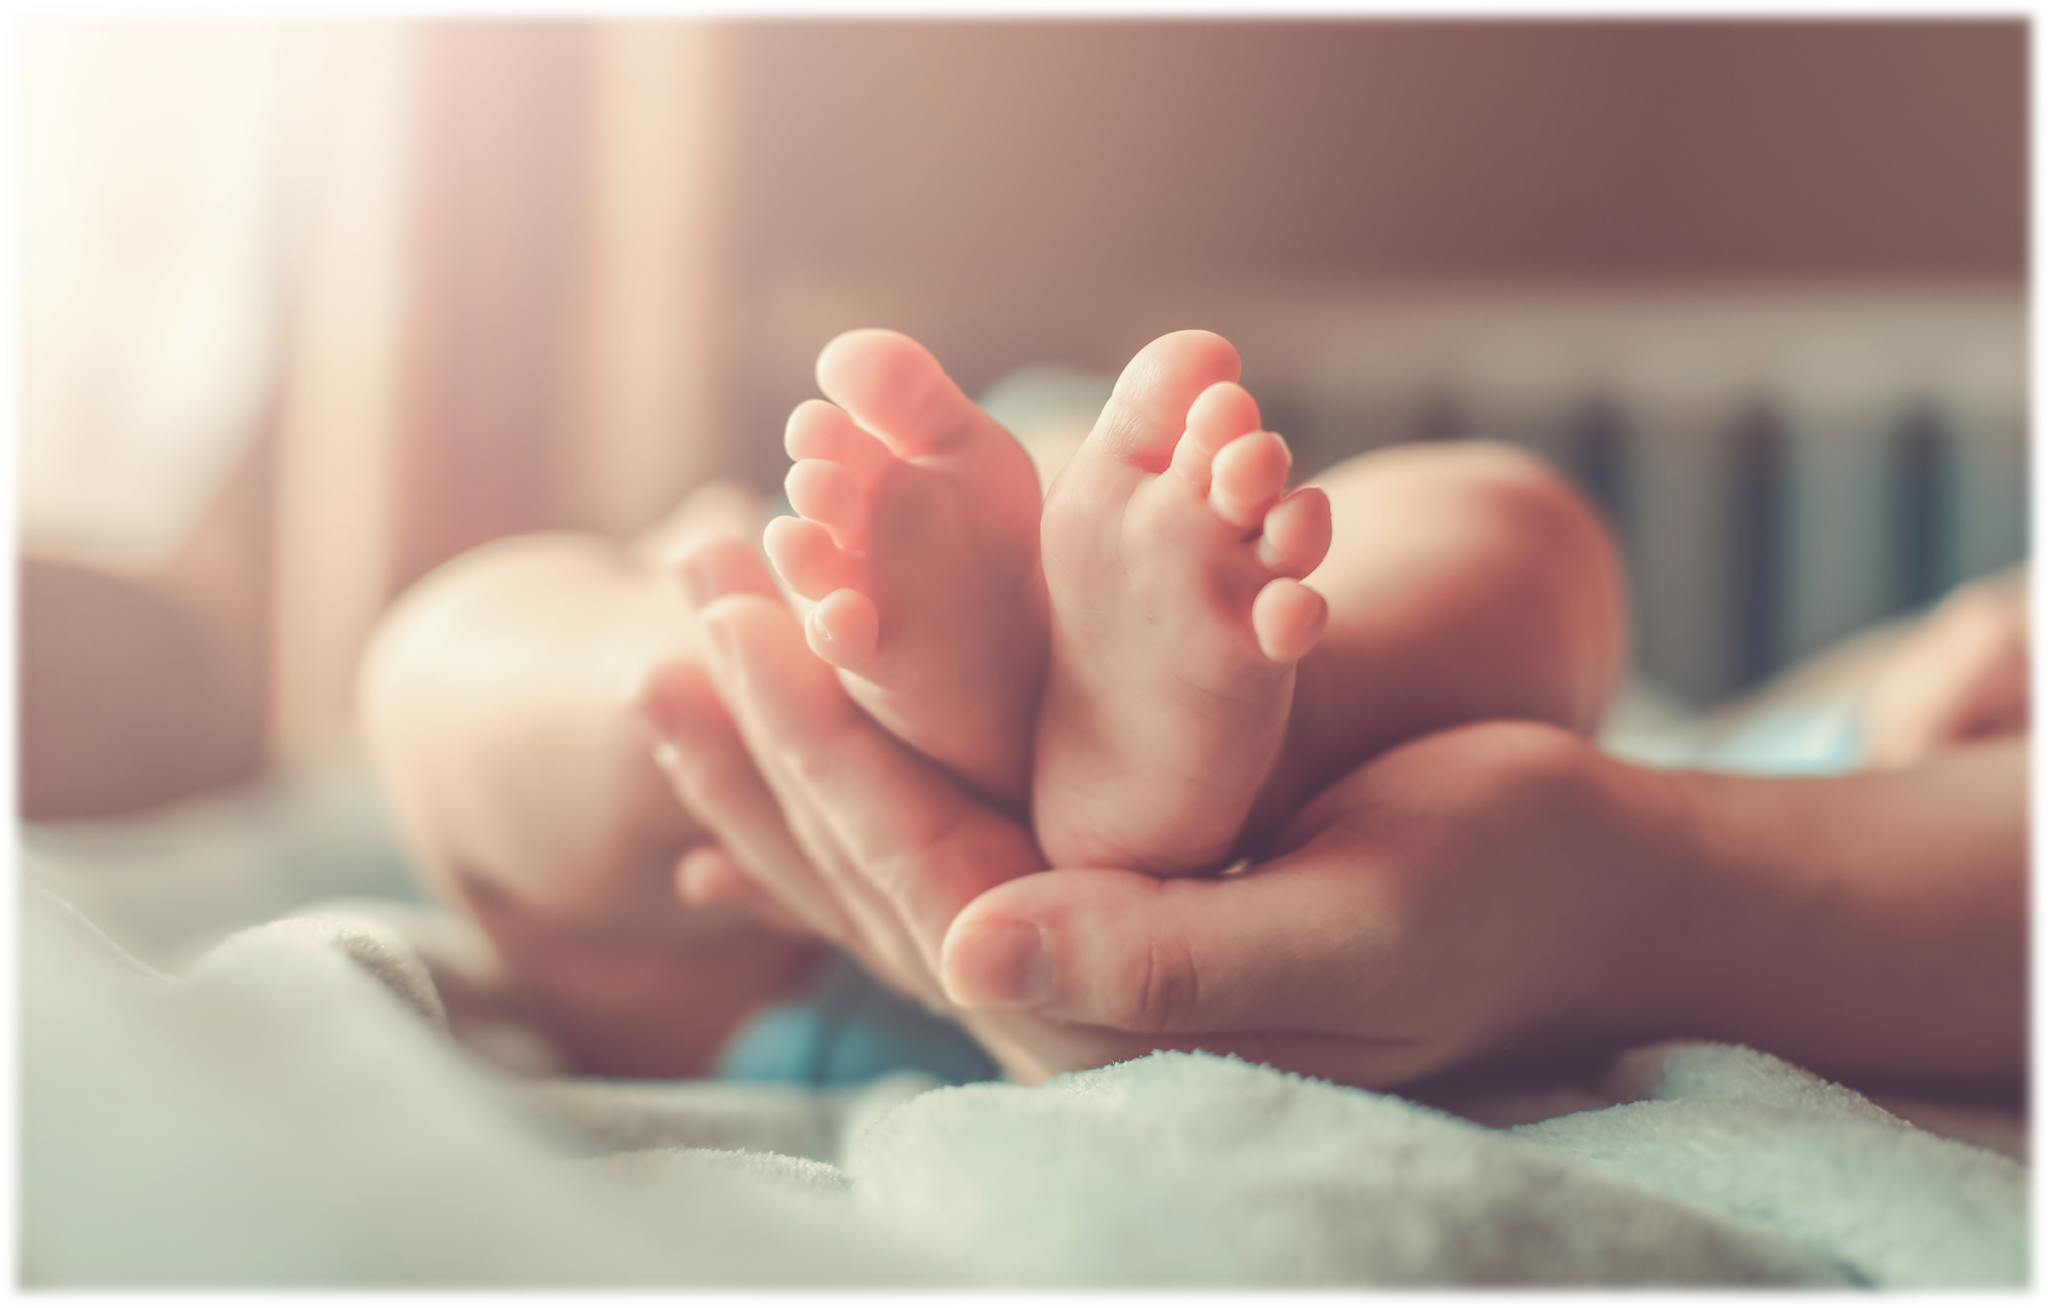 Decorative: Baby's feet in an adult's hand